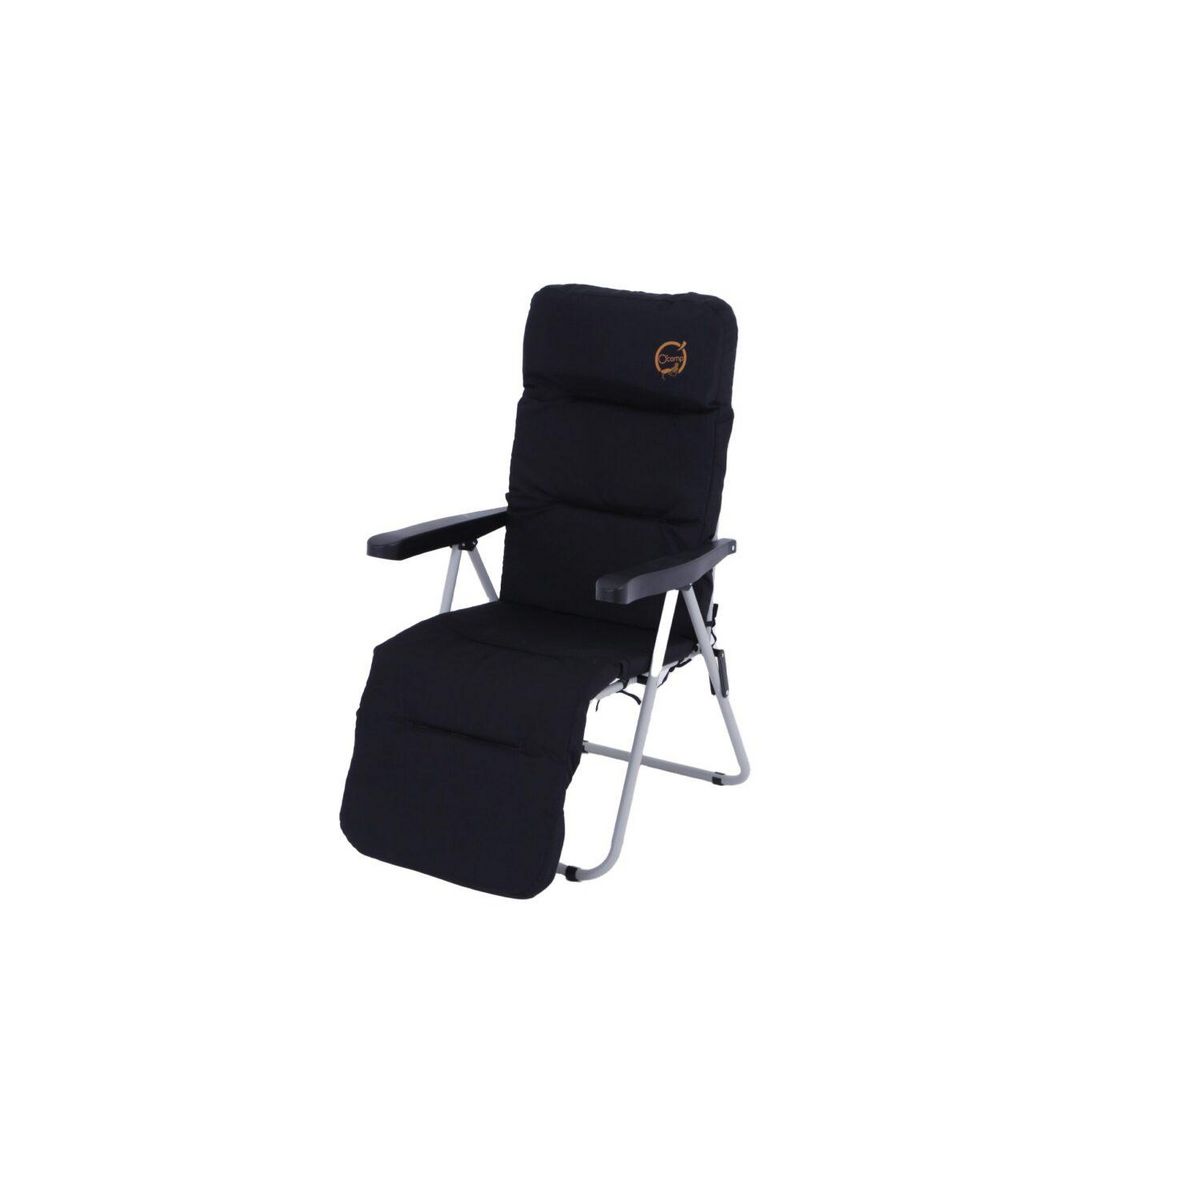 O'Camp Fauteuil de camping relax pliable - O'camp - Multipositions - Dimensions : 62 x 92 x 105 cm